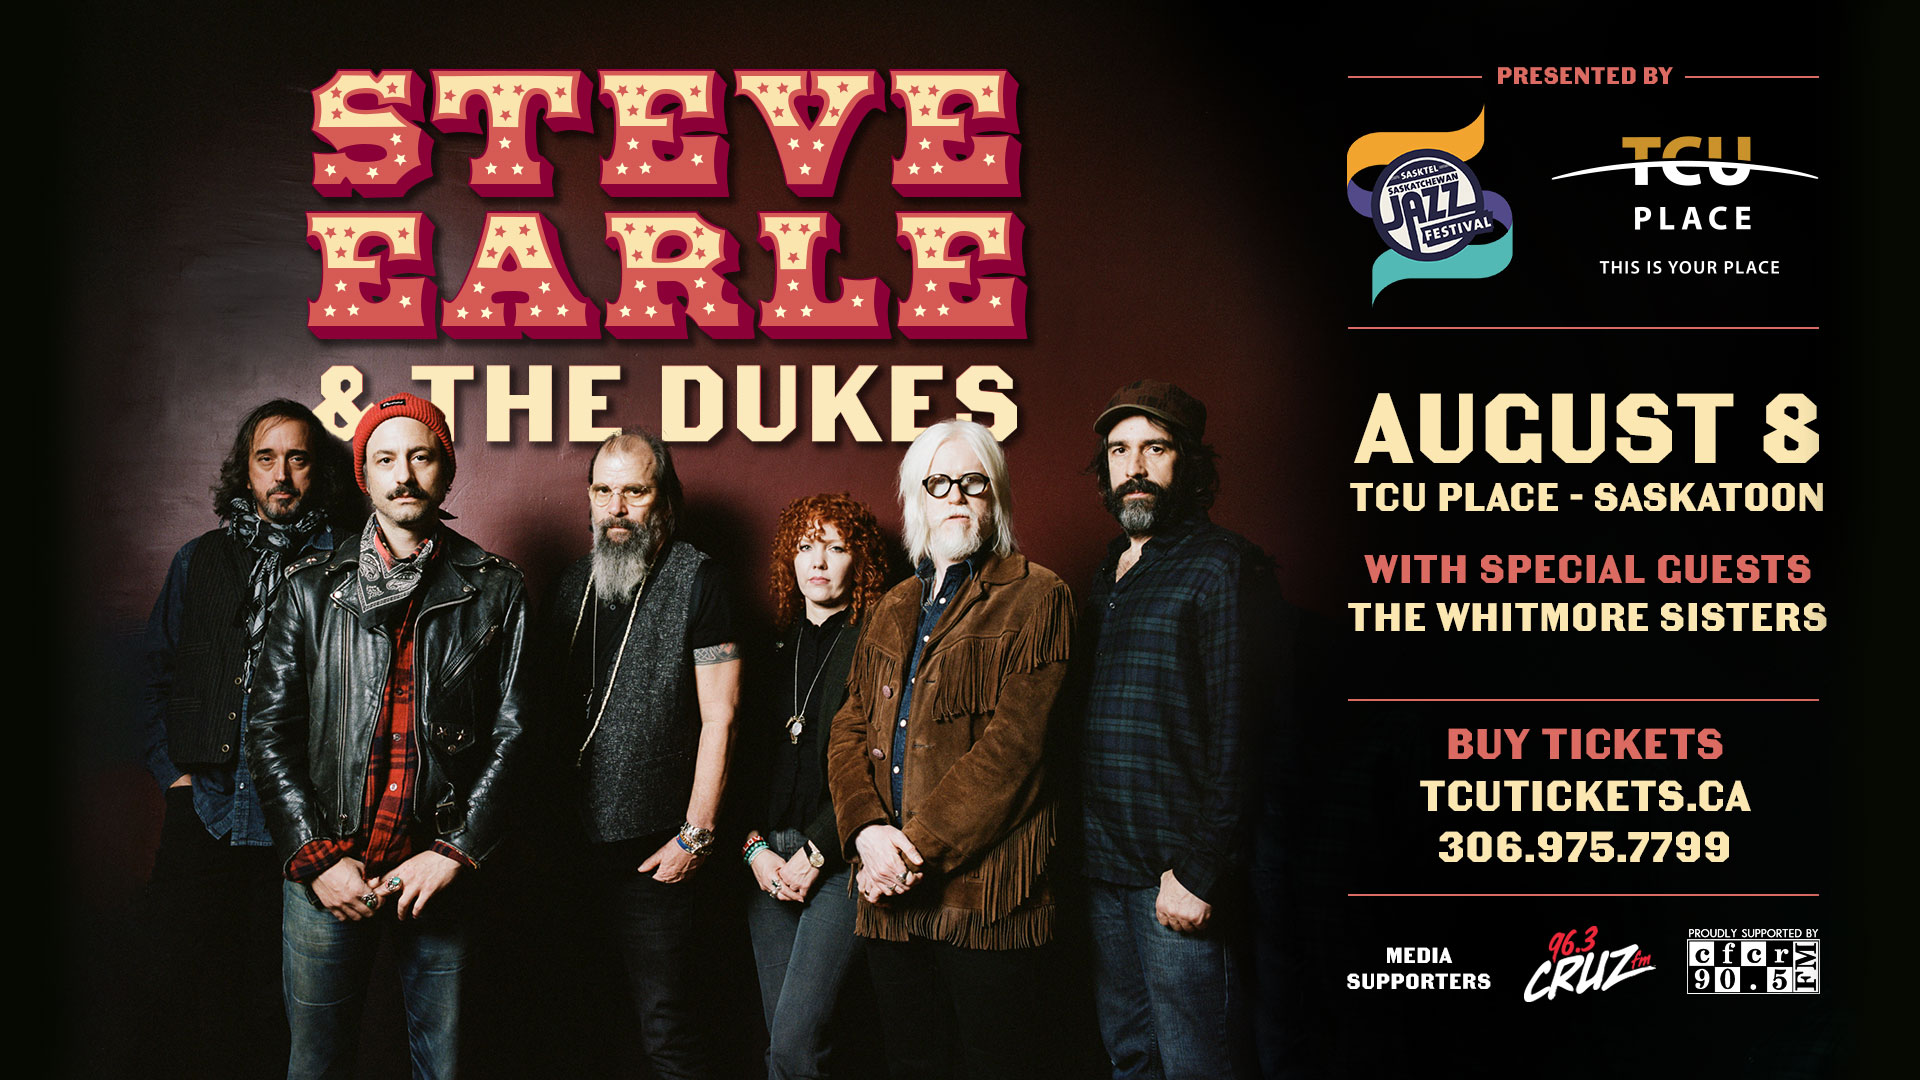 Steve Earle and The Dukes With Special Guests The Whitmore Sisters